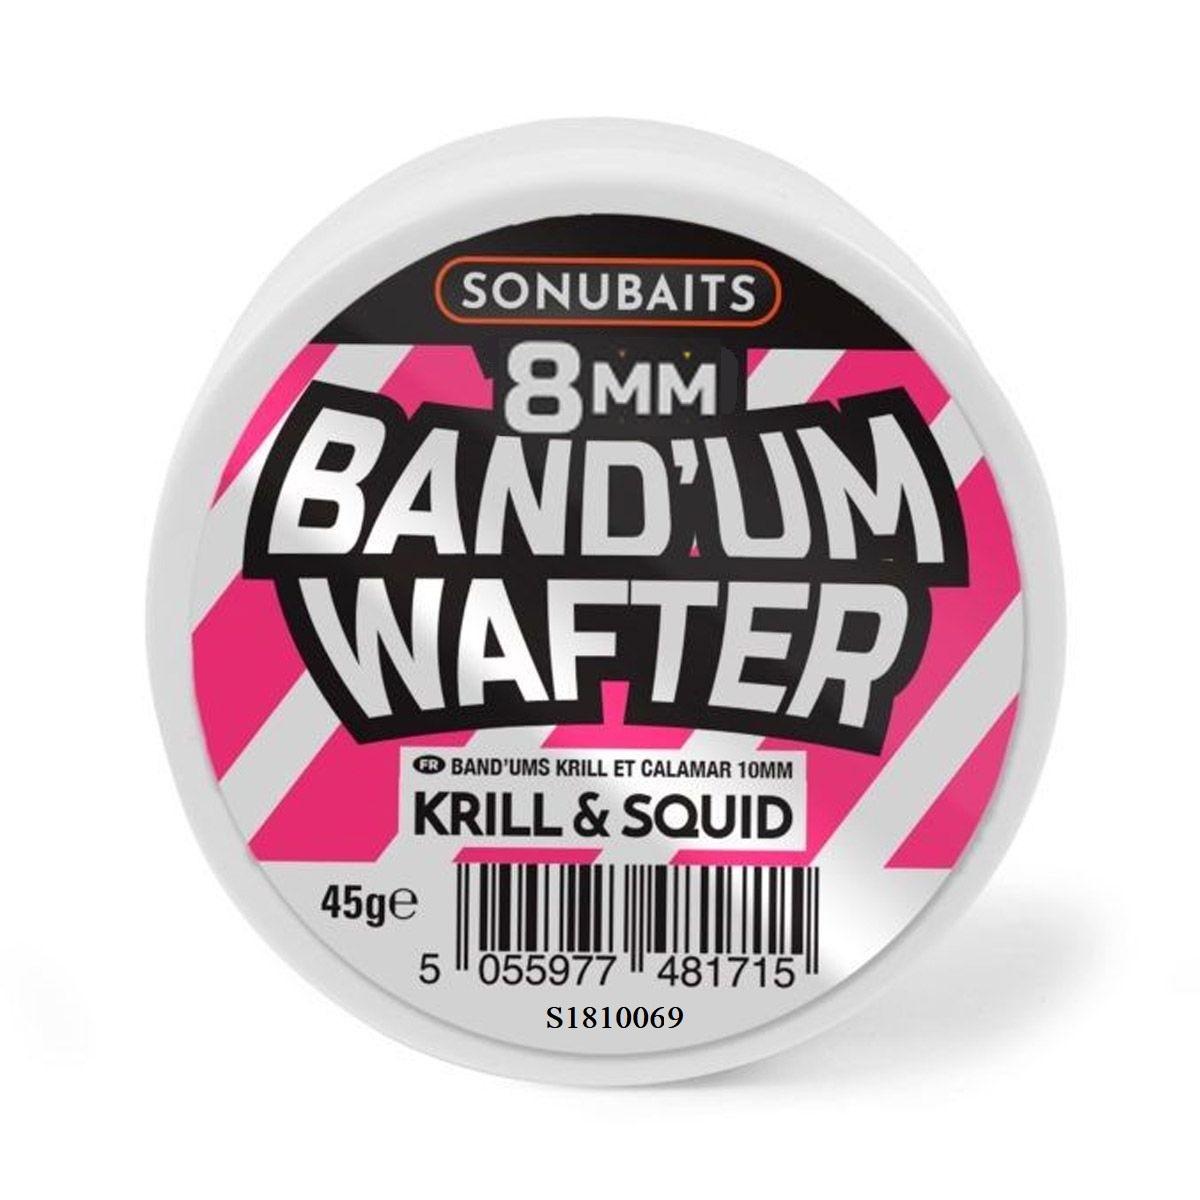 Sonubaits Band UM Wafters | Power Scopex 8mm